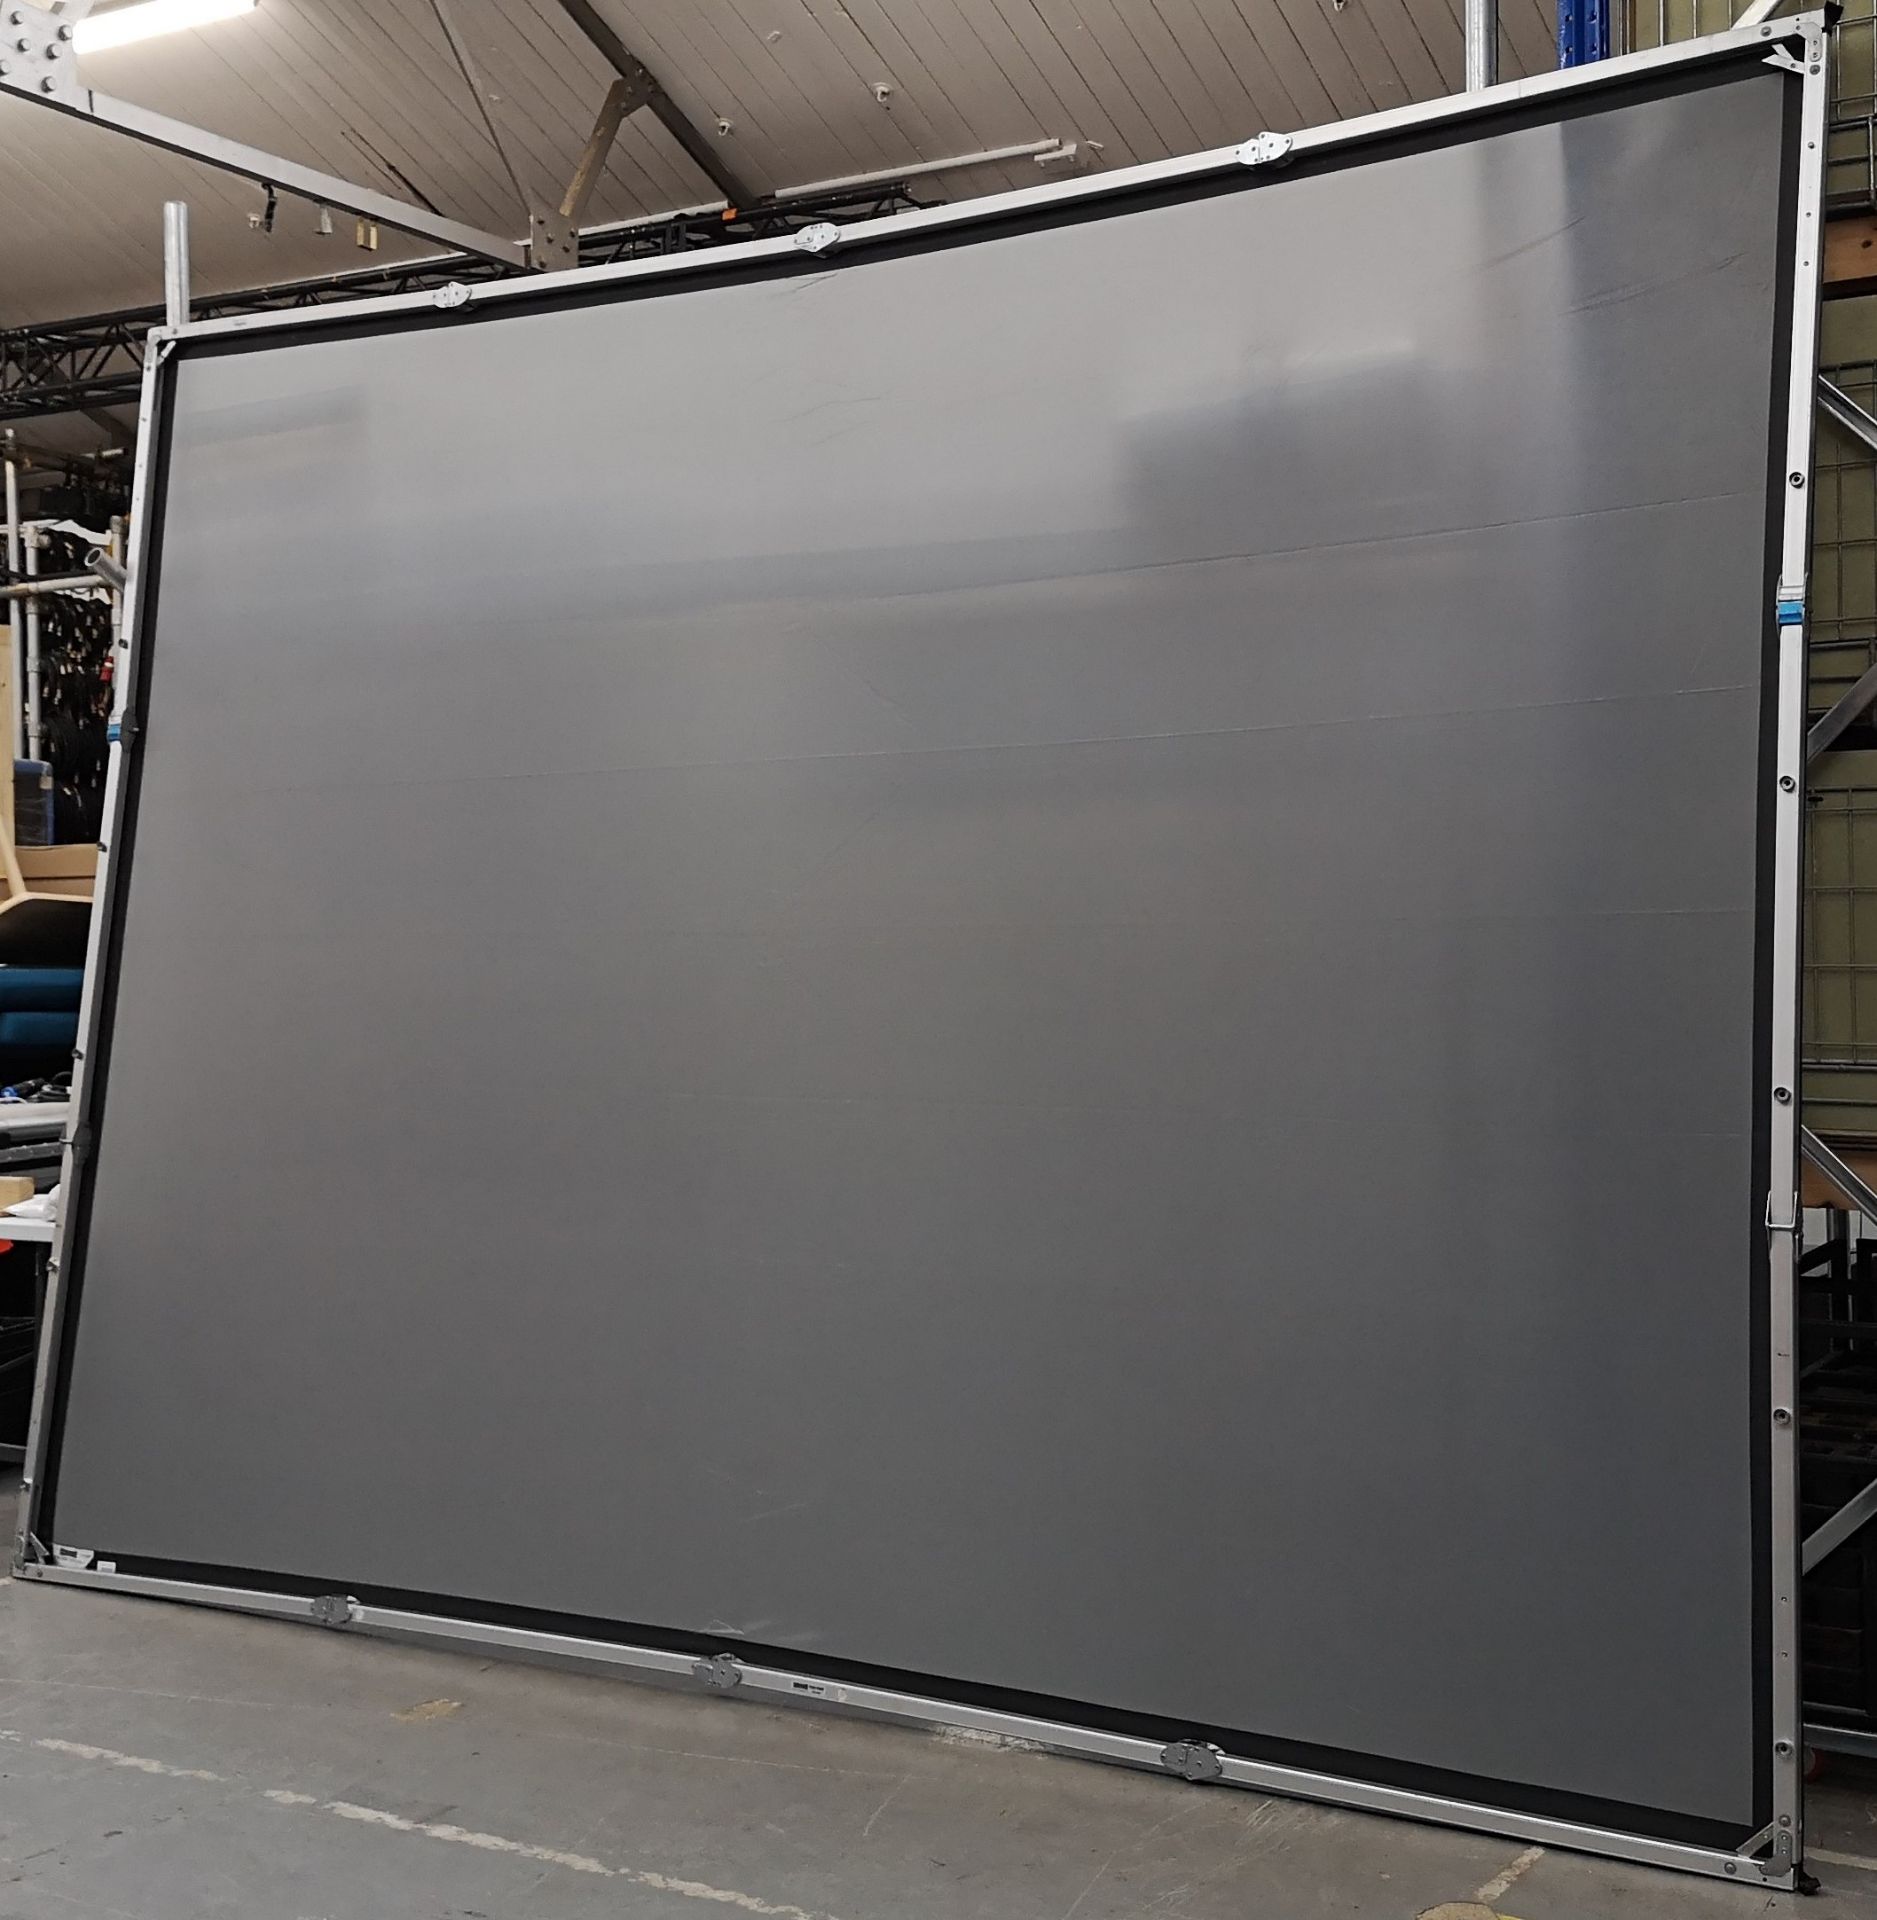 A DA-LITE 12ft x 9ft Rear Projection Fastfold Screen with frame, legs, bolts, screen surface, bag - Image 3 of 10